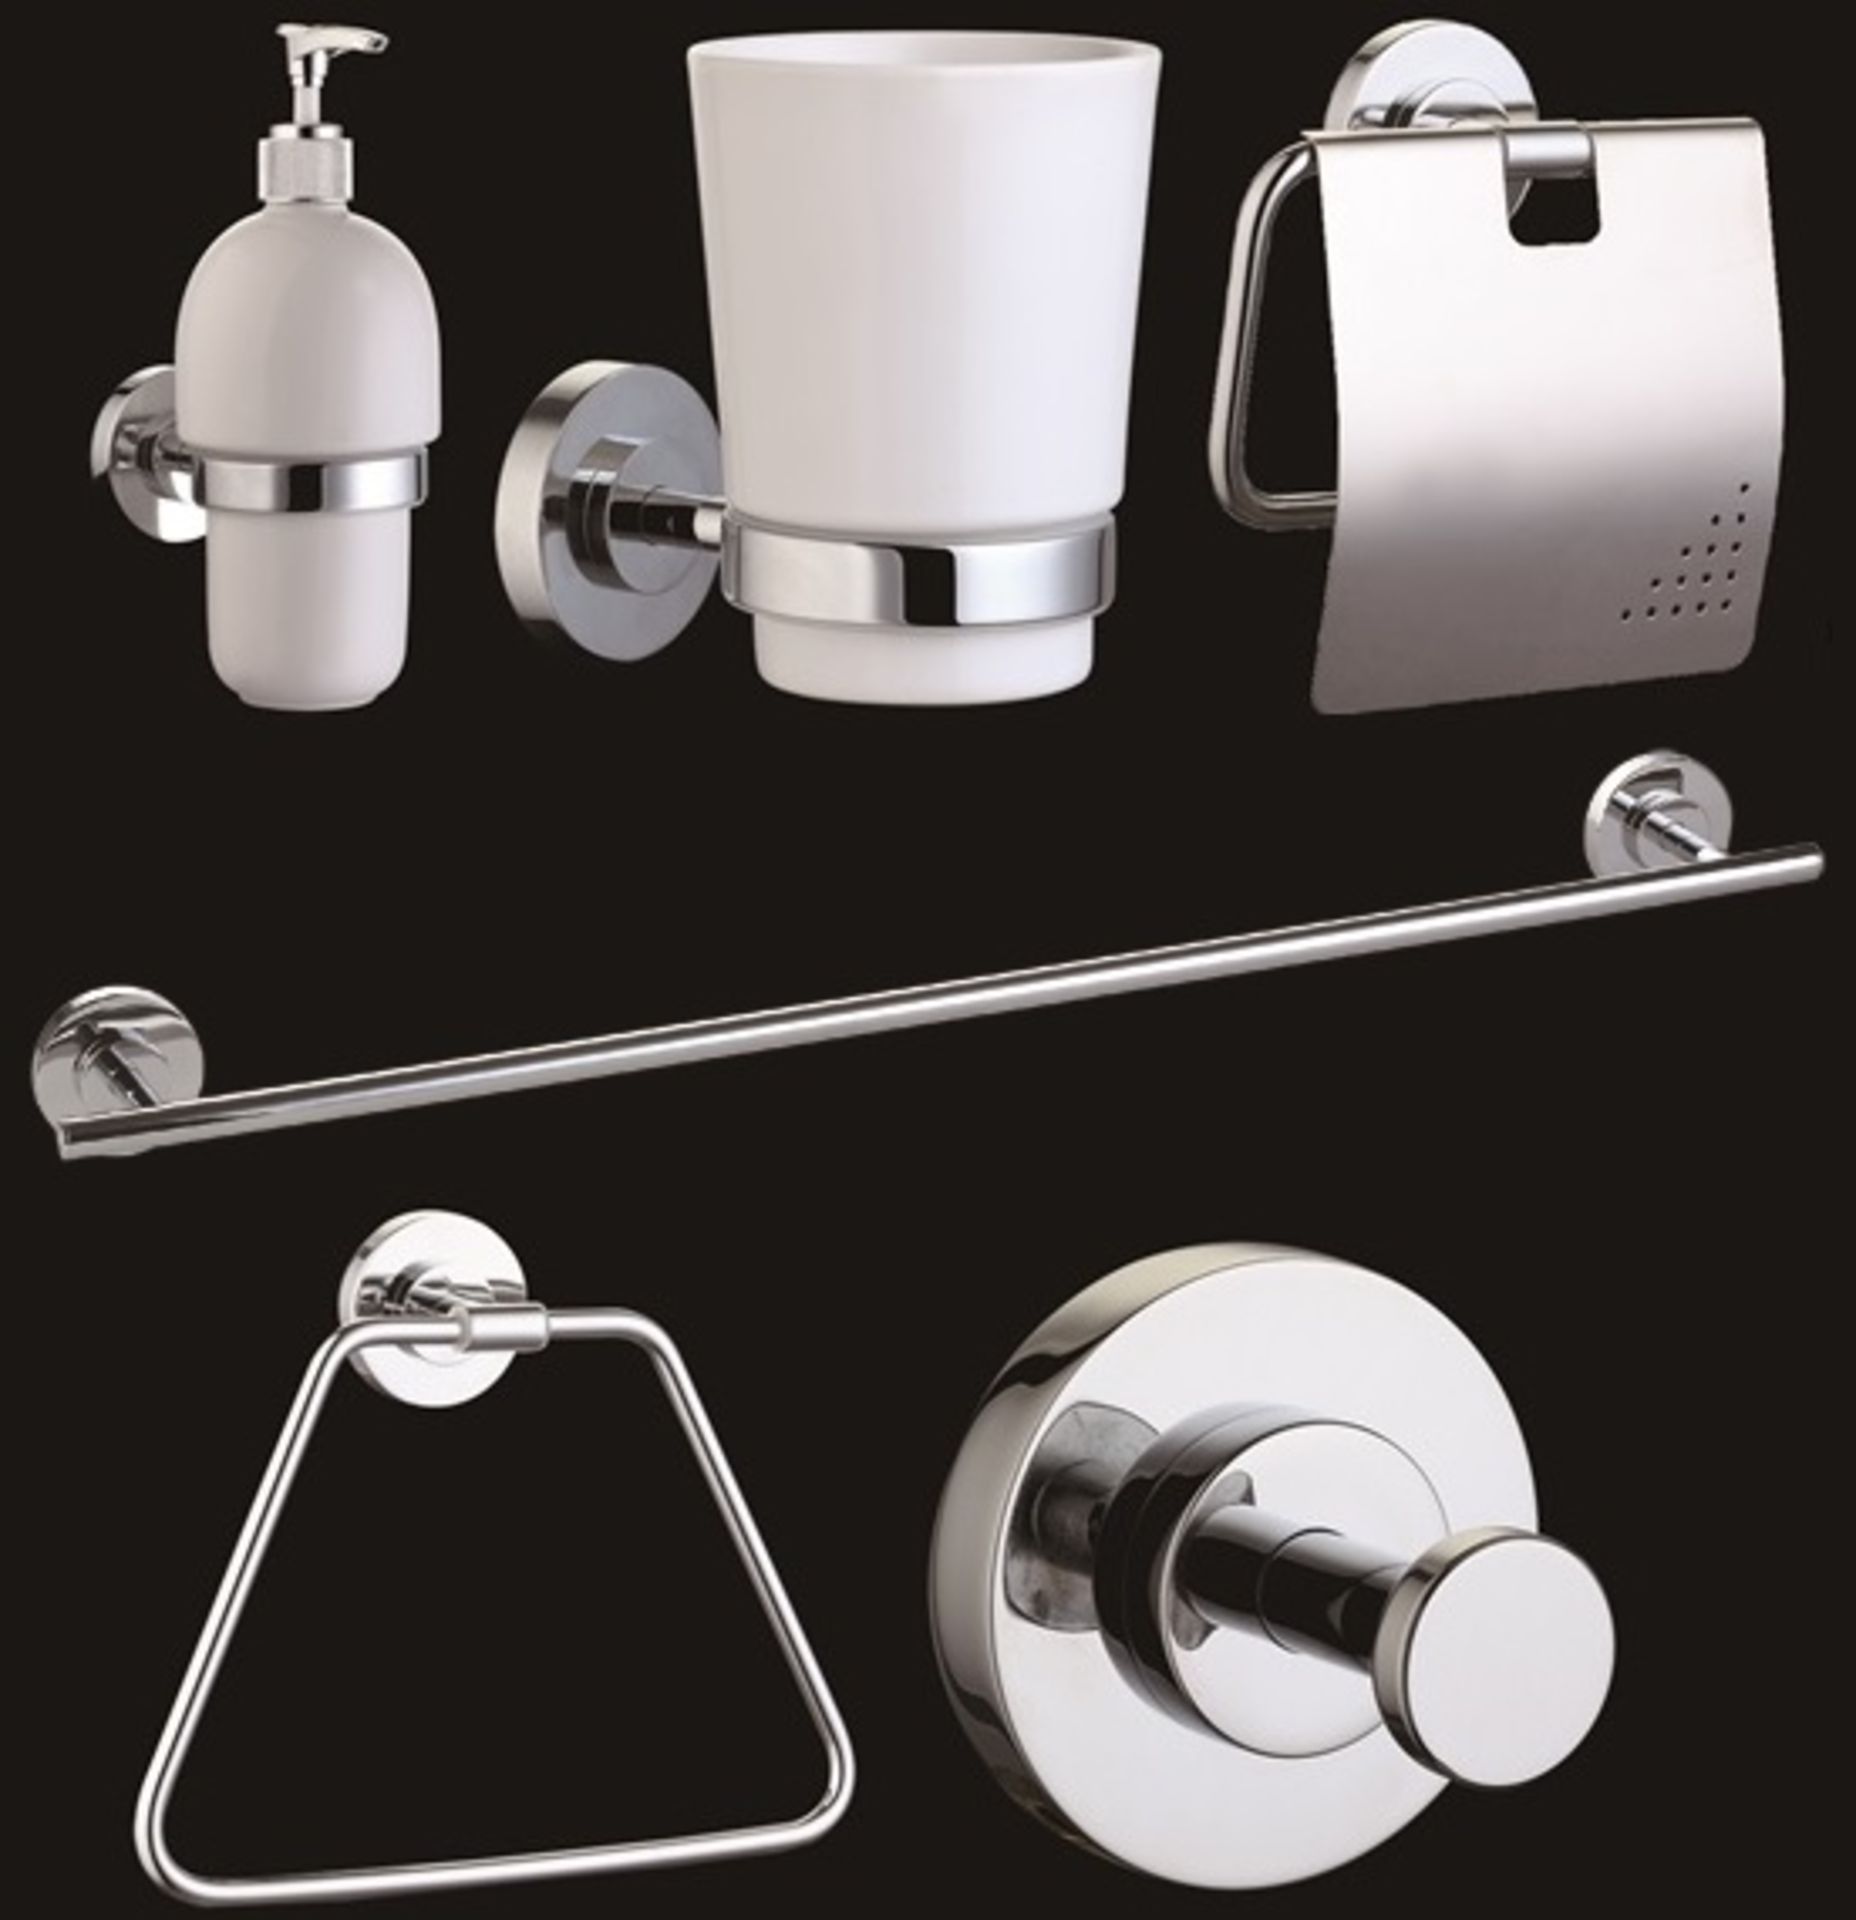 1 x Vogue Series 5 Six Piece Bathroom Accessory Set - Includes WC Roll Holder, Soap Dispenser, - Image 4 of 7